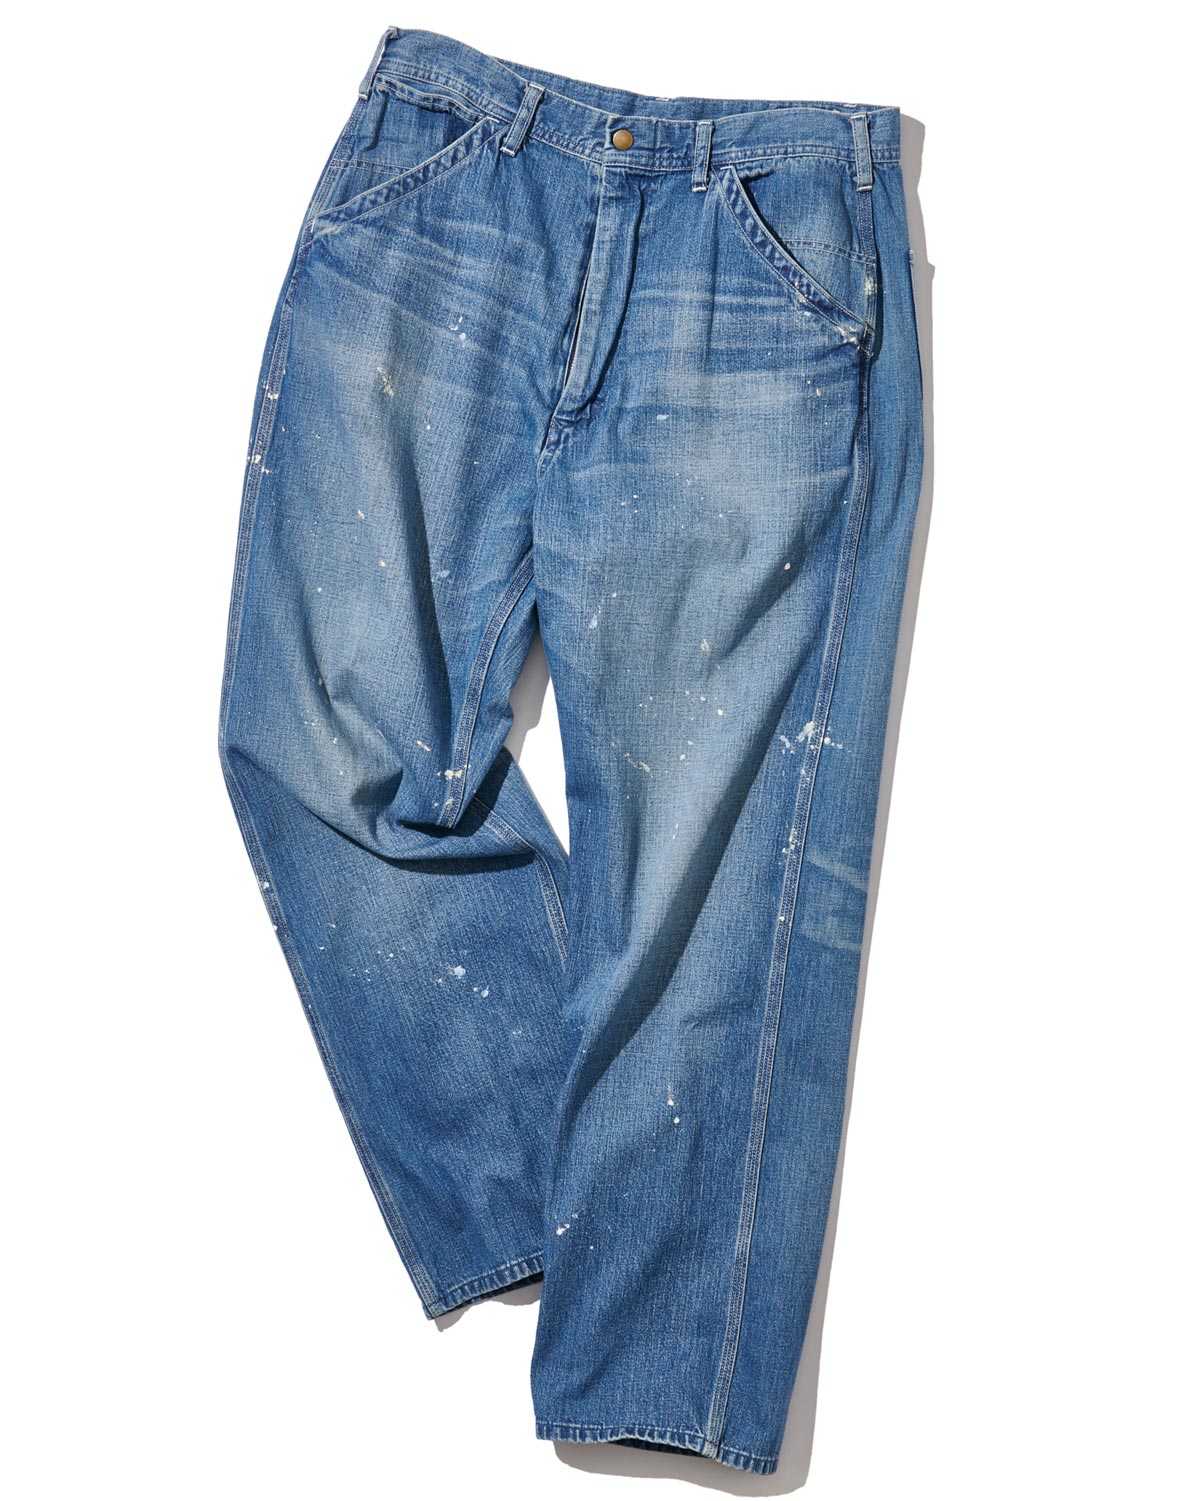 An exhilarating indigo series of <Ron Herman> that is irresistible for denim lovers!”/><span style=